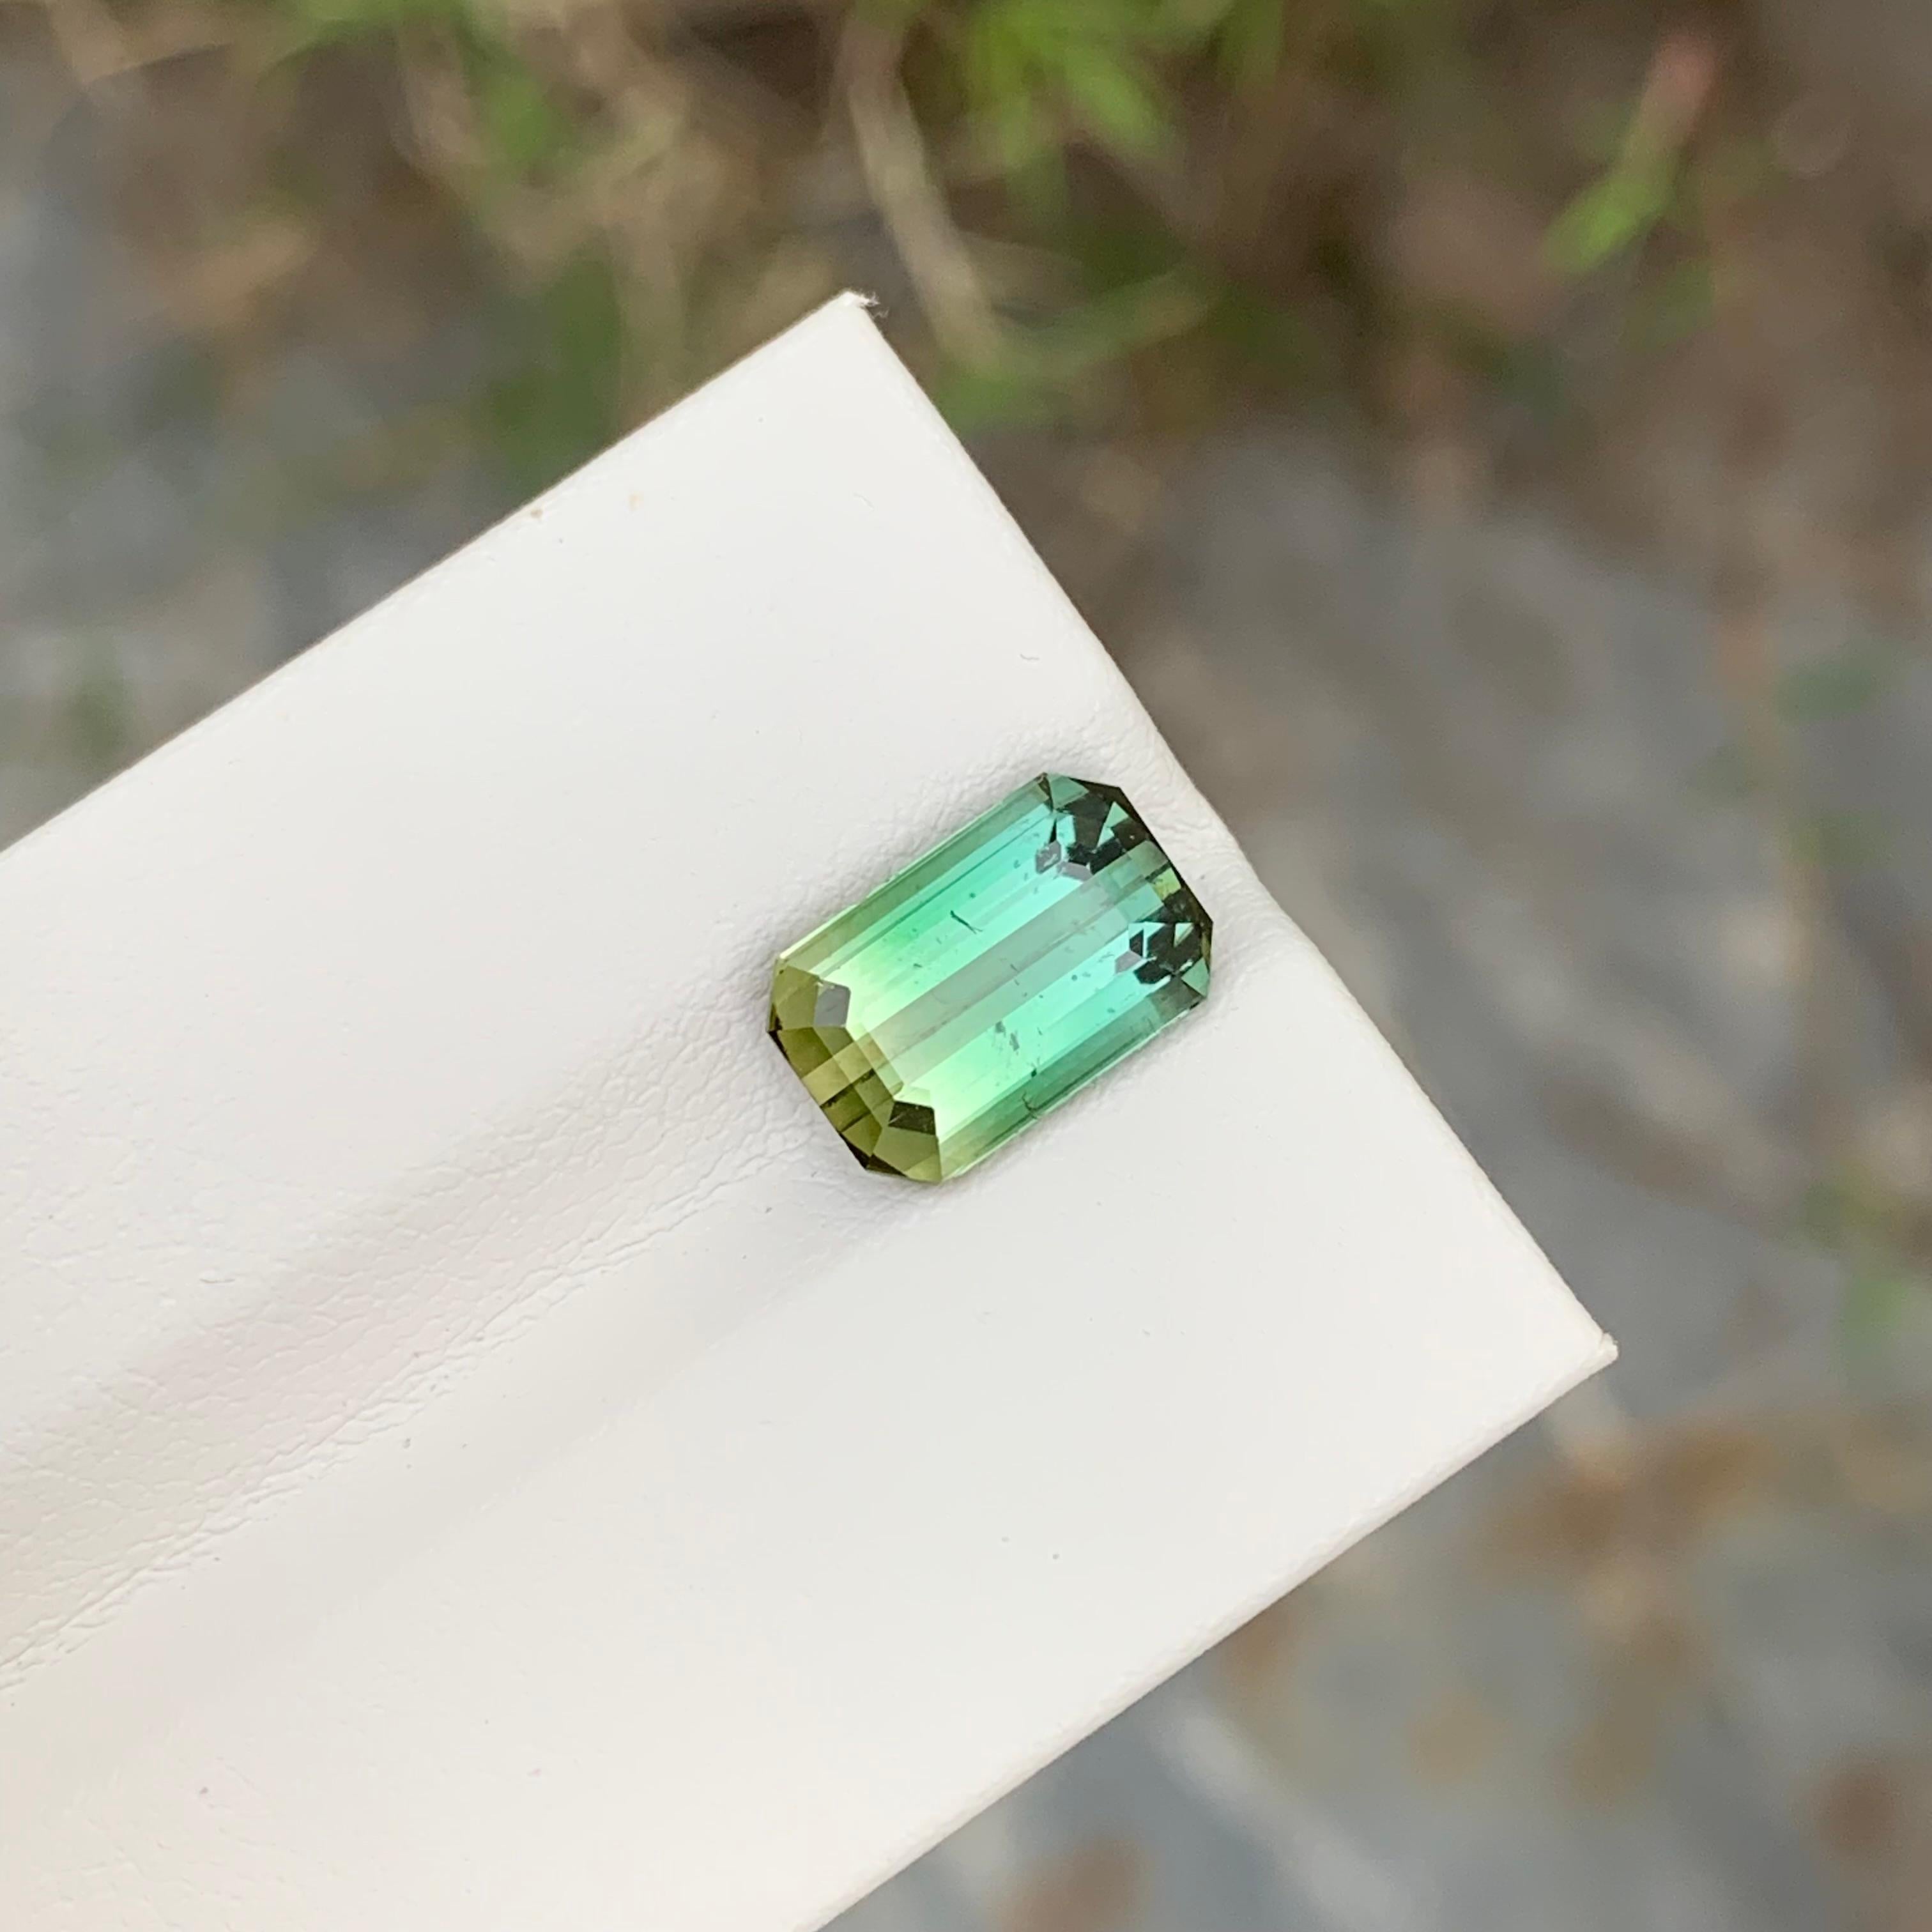 Loose Bi Colour Tourmaline

Weight: 3.80 Carats
Dimension: 11 x 7.1 x 5.4 Mm
Colour: Green And Yellow
Origin: Africa
Certificate: On Demand
Treatment: Non

Tourmaline is a captivating gemstone known for its remarkable variety of colors, making it a